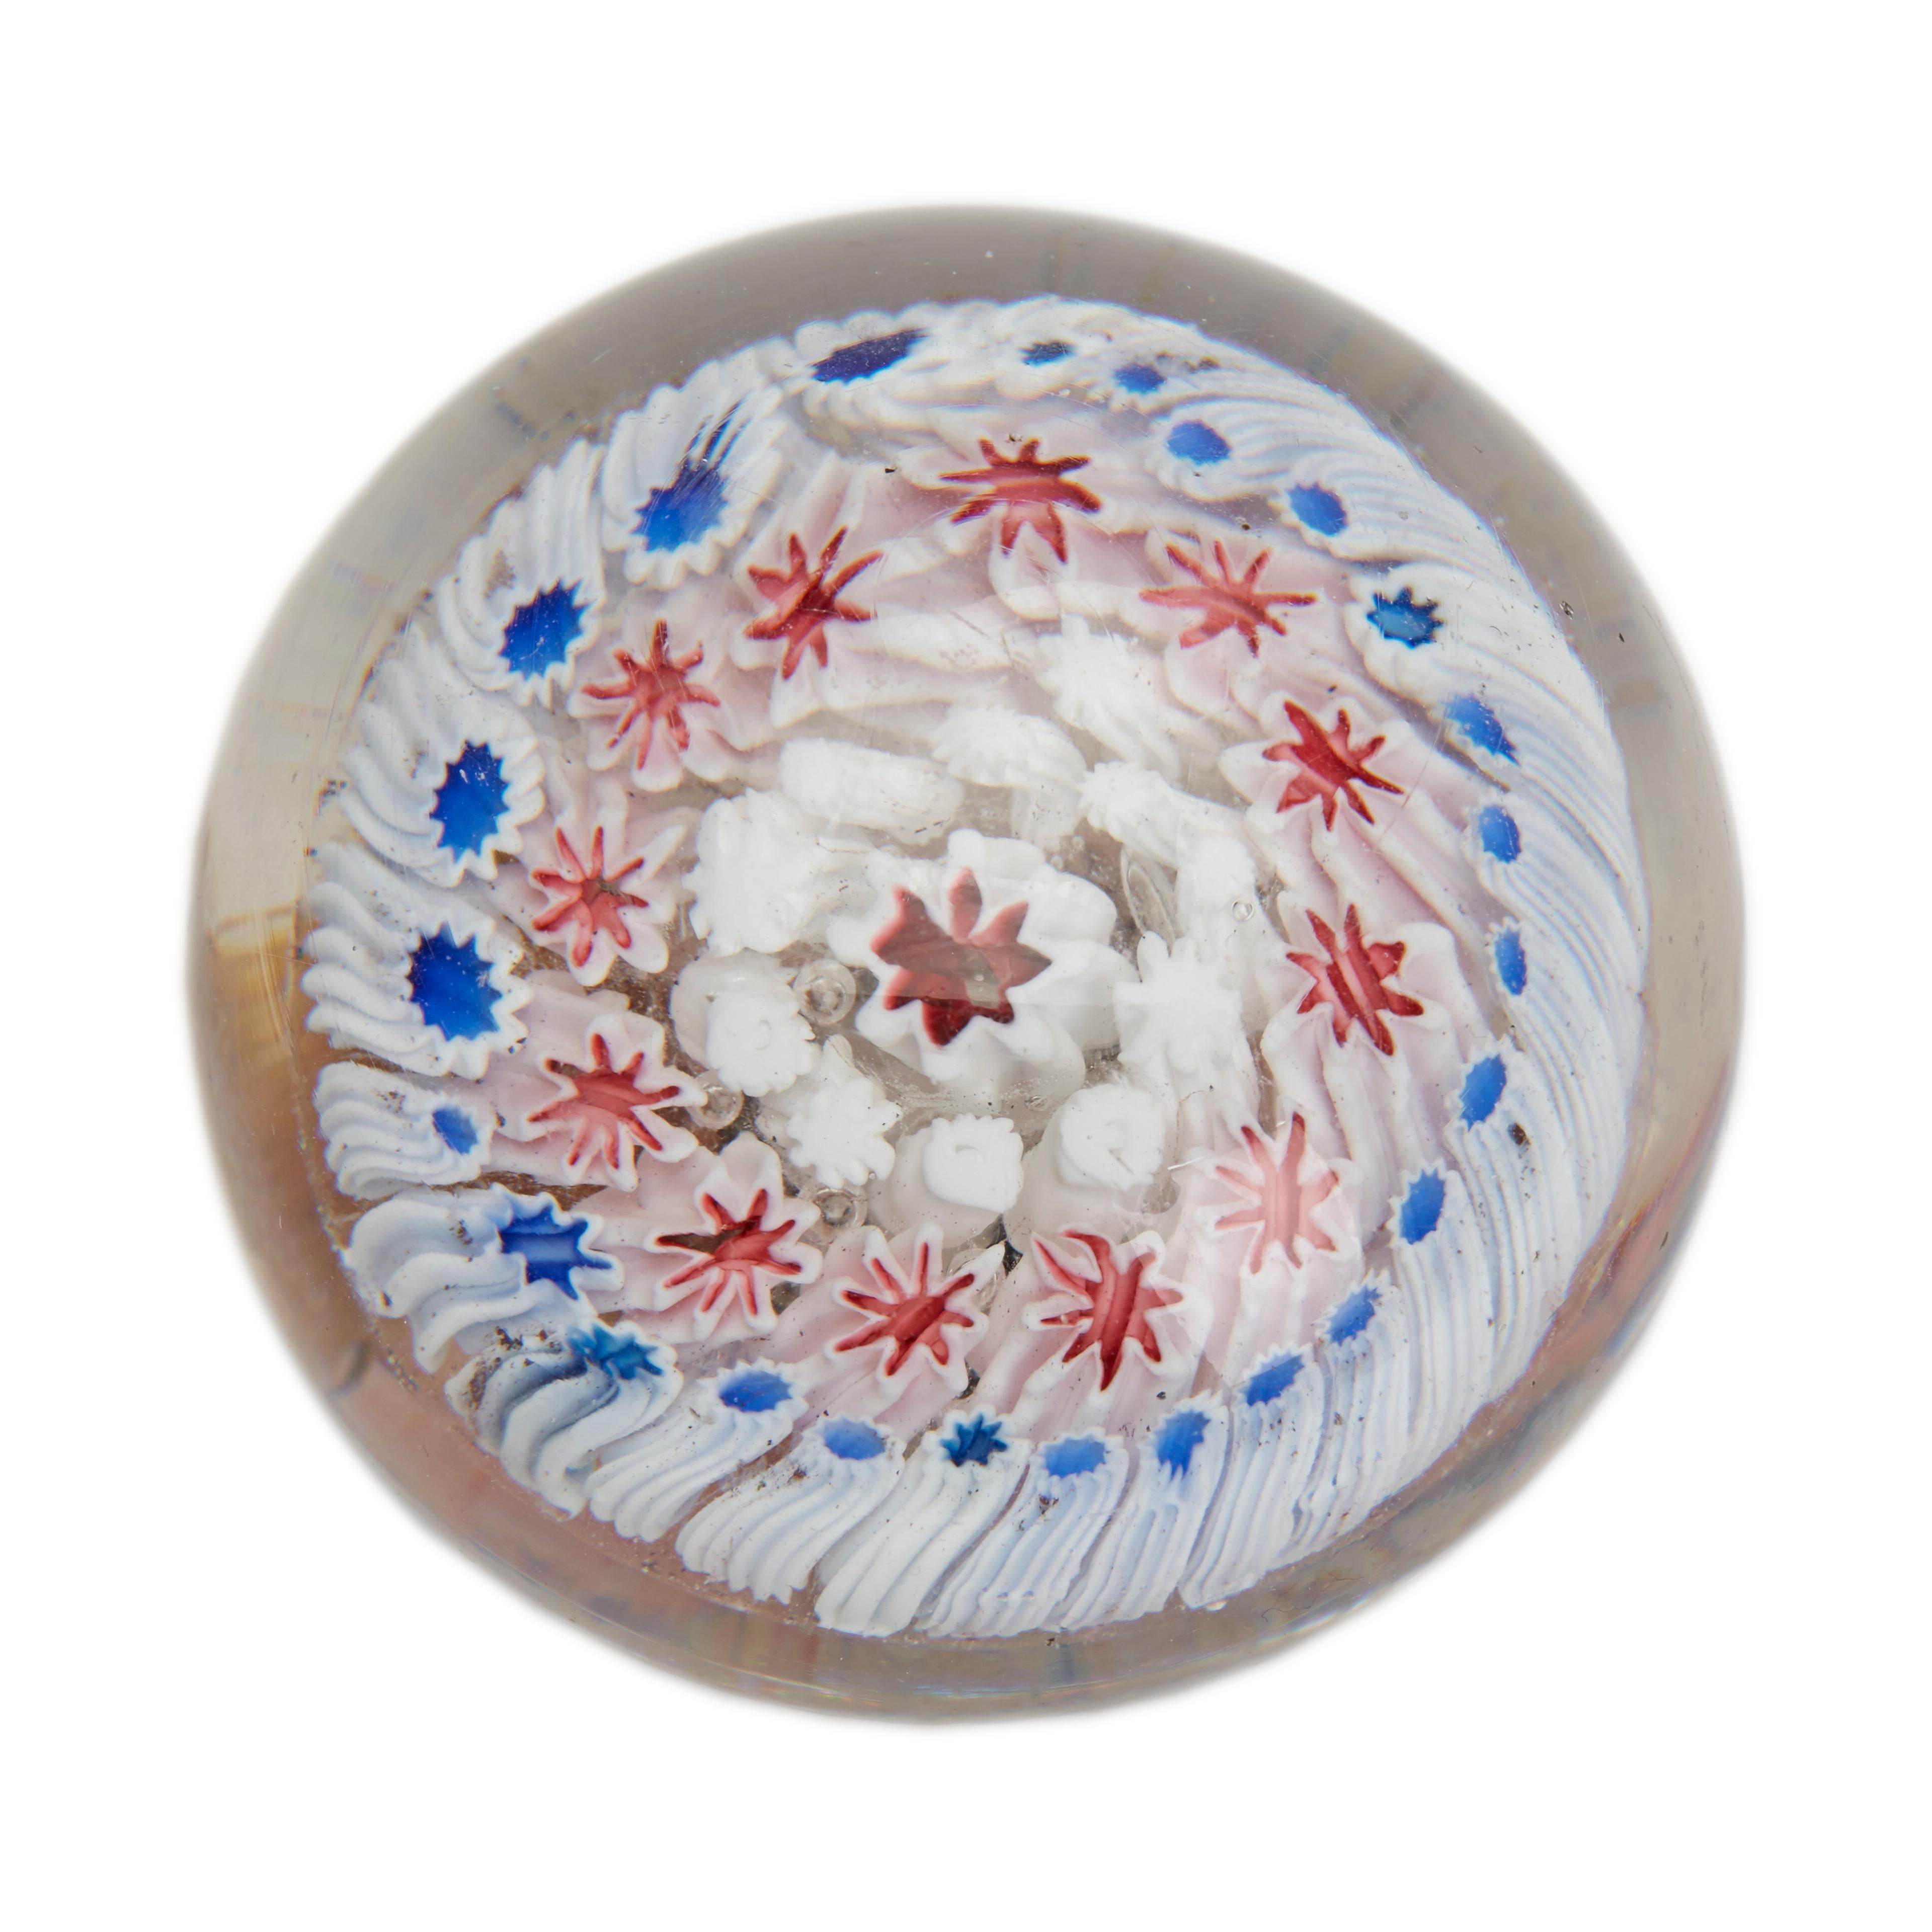 A fine antique English glass concentric paperweight with rows of star formed canes probably dating from the latter 19th century. The rounded clear glass formed weight is of domed form and contains concentric rows of blue, red and white star shaped